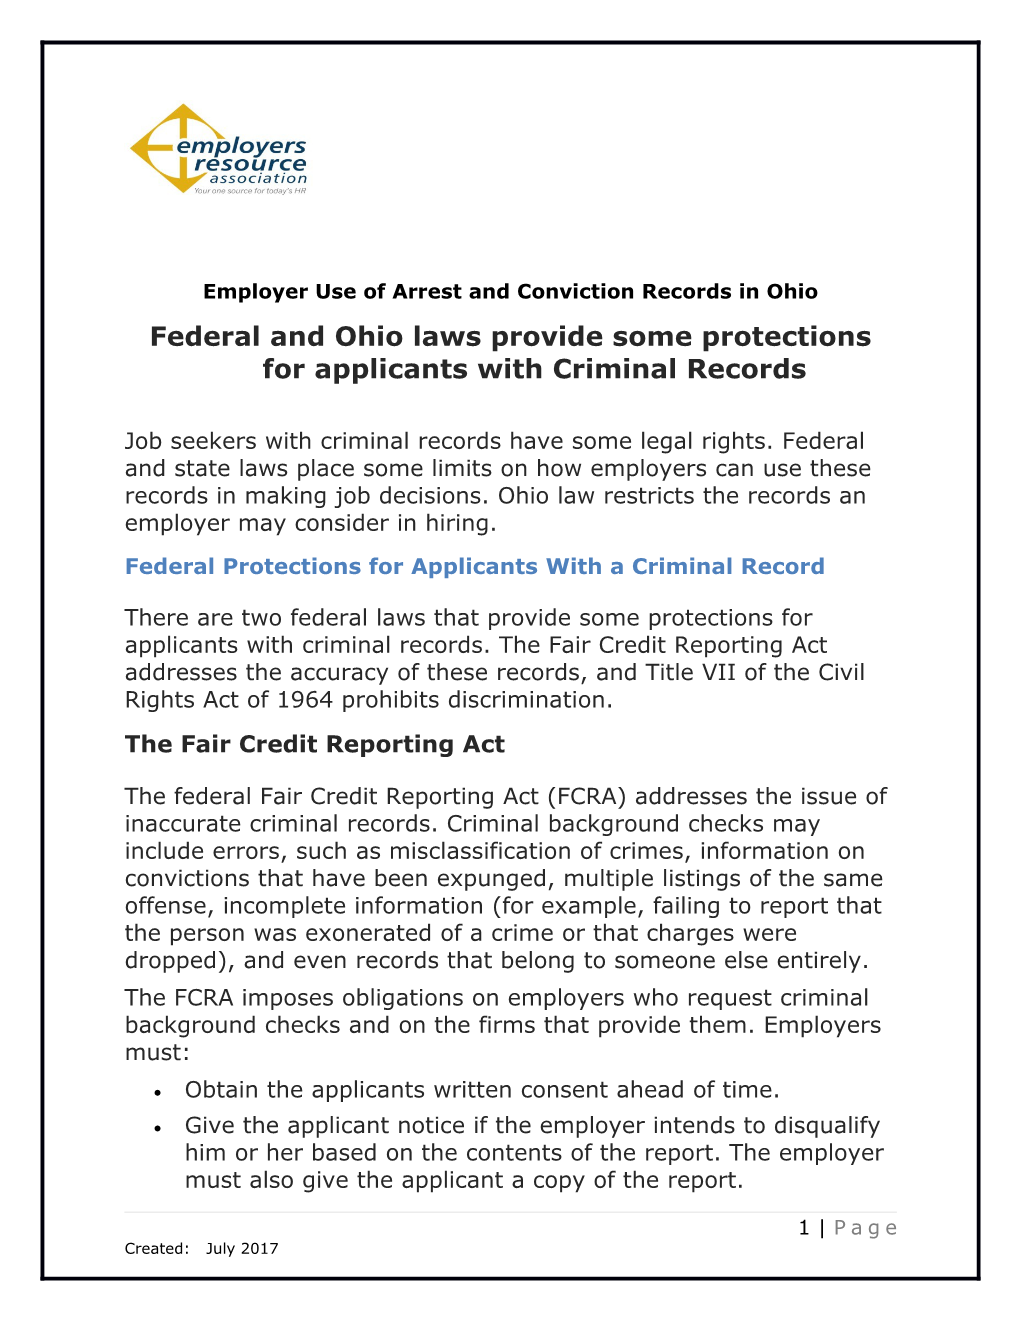 Employer Use of Arrest and Conviction Records in Ohio